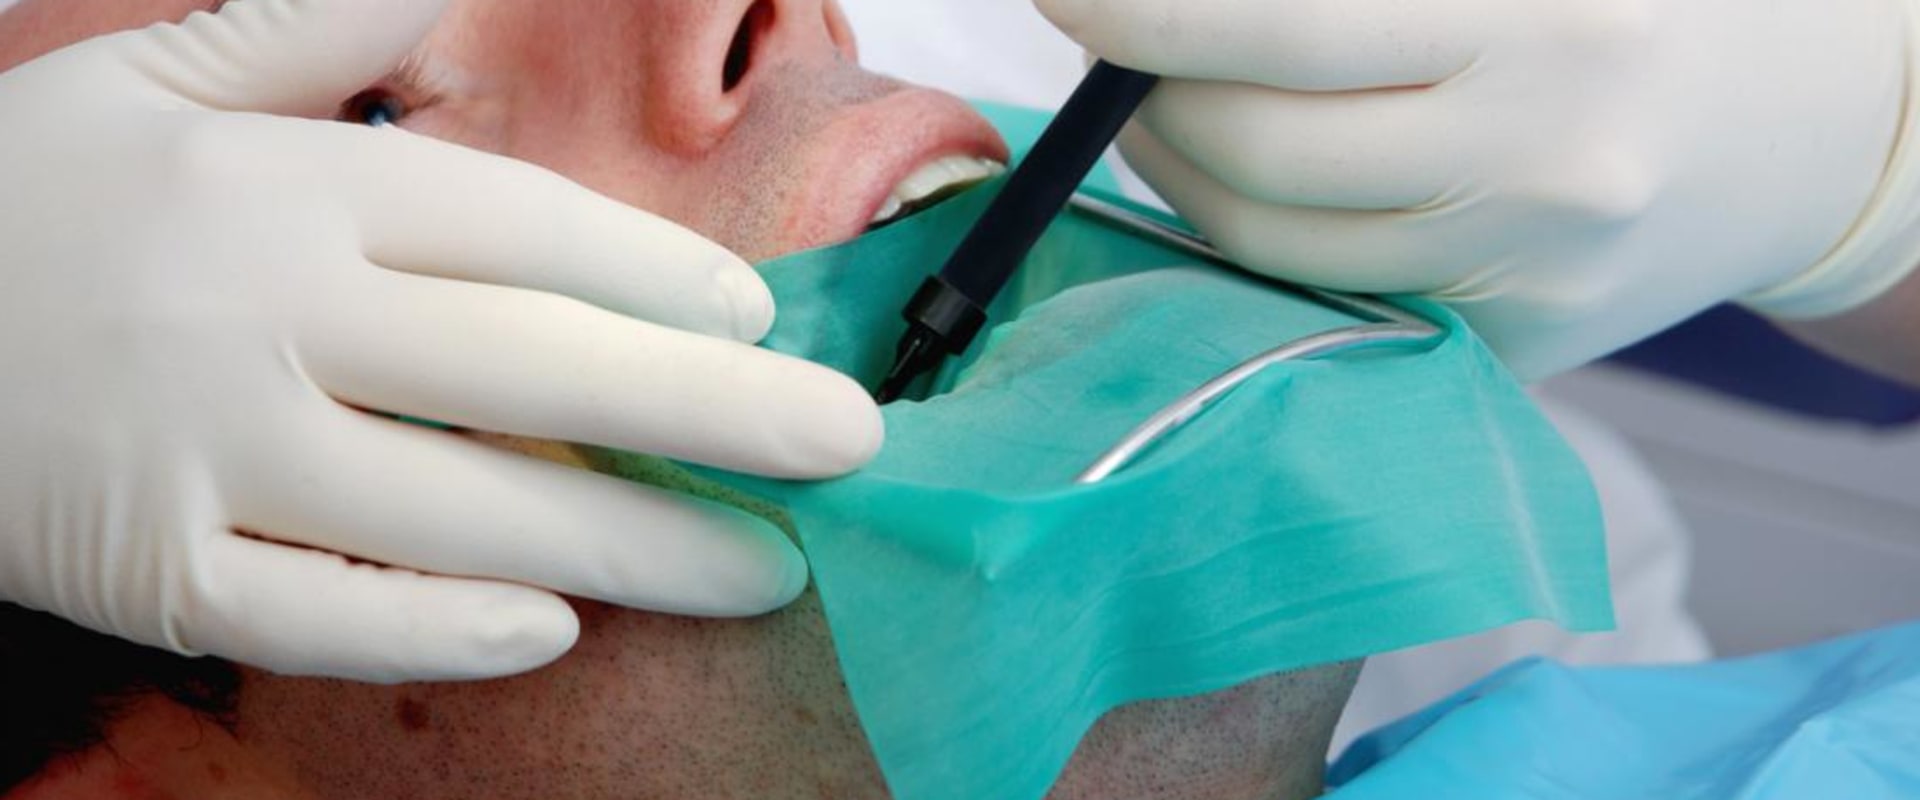 What Does an Endodontist Do?